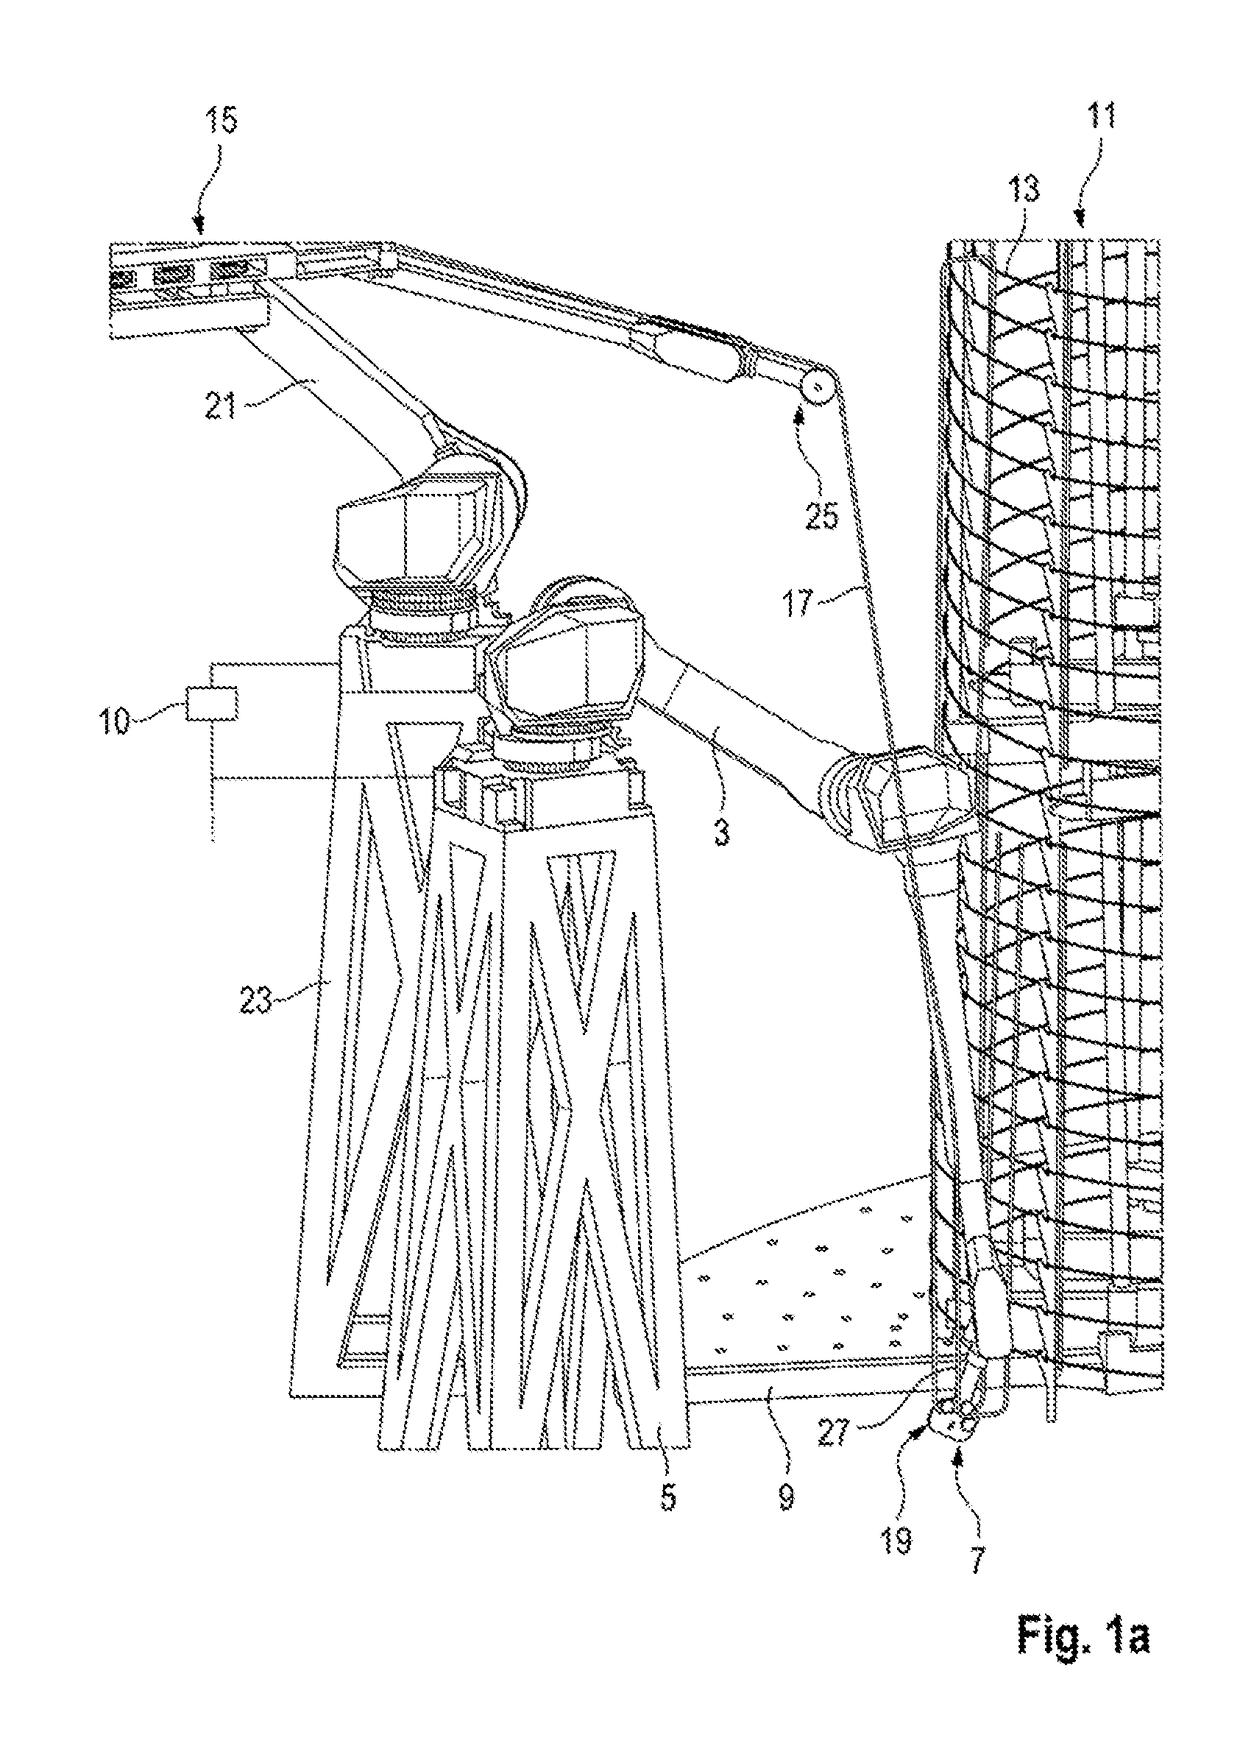 Installation for producing reinforcement cages for tower segments of wind turbines